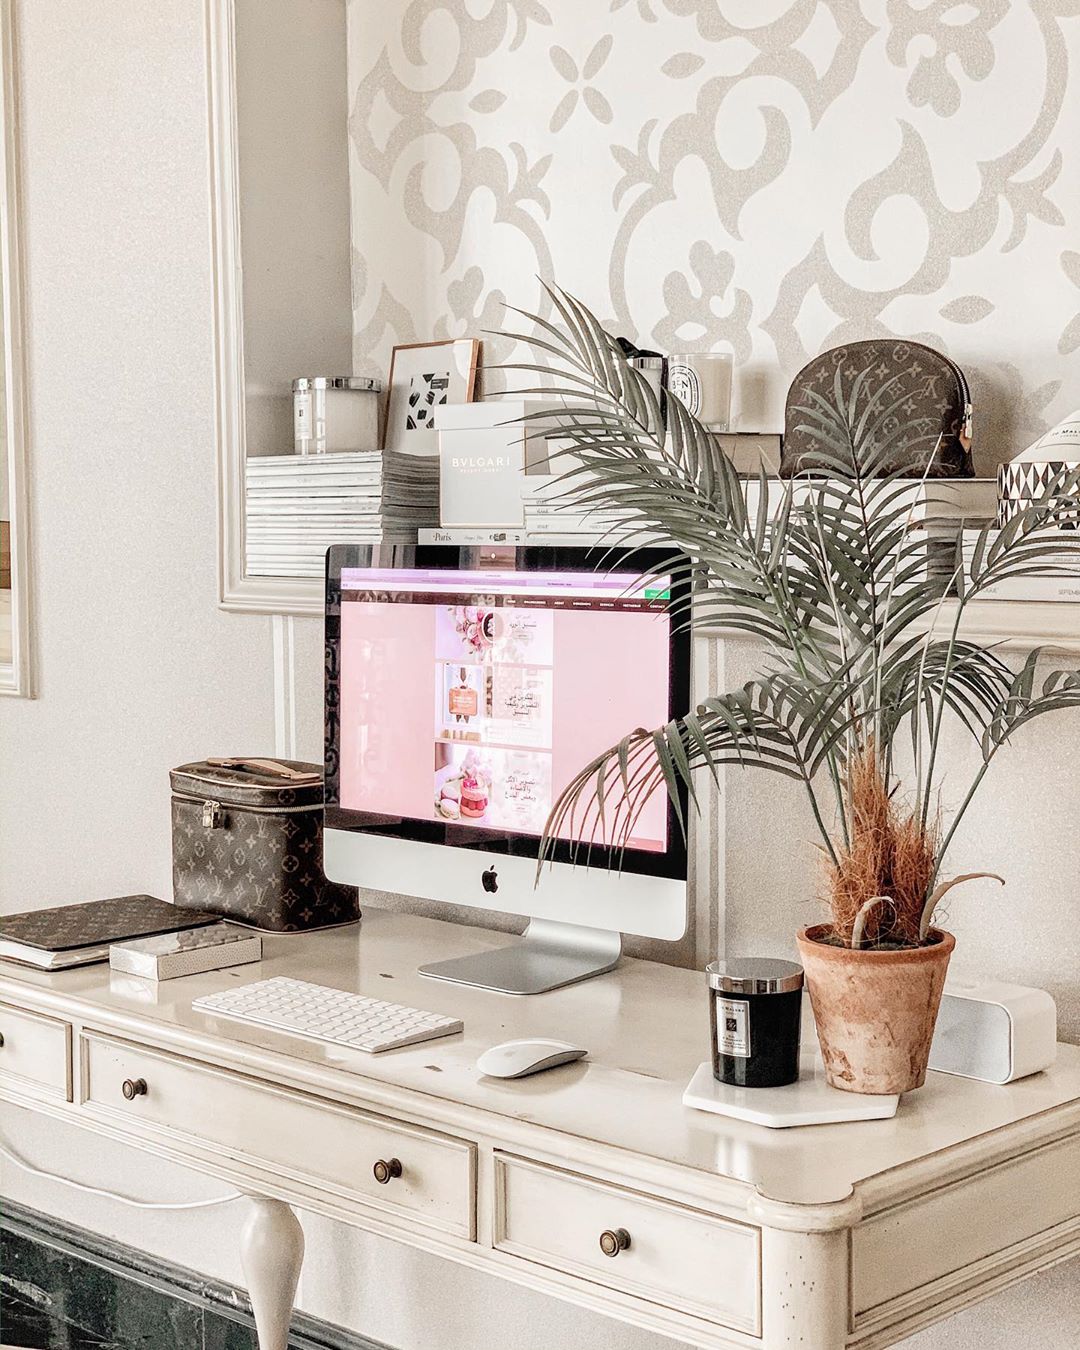 https://www.extraspace.com/blog/wp-content/uploads/2020/04/create-productive-work-from-home-office-plants.jpg